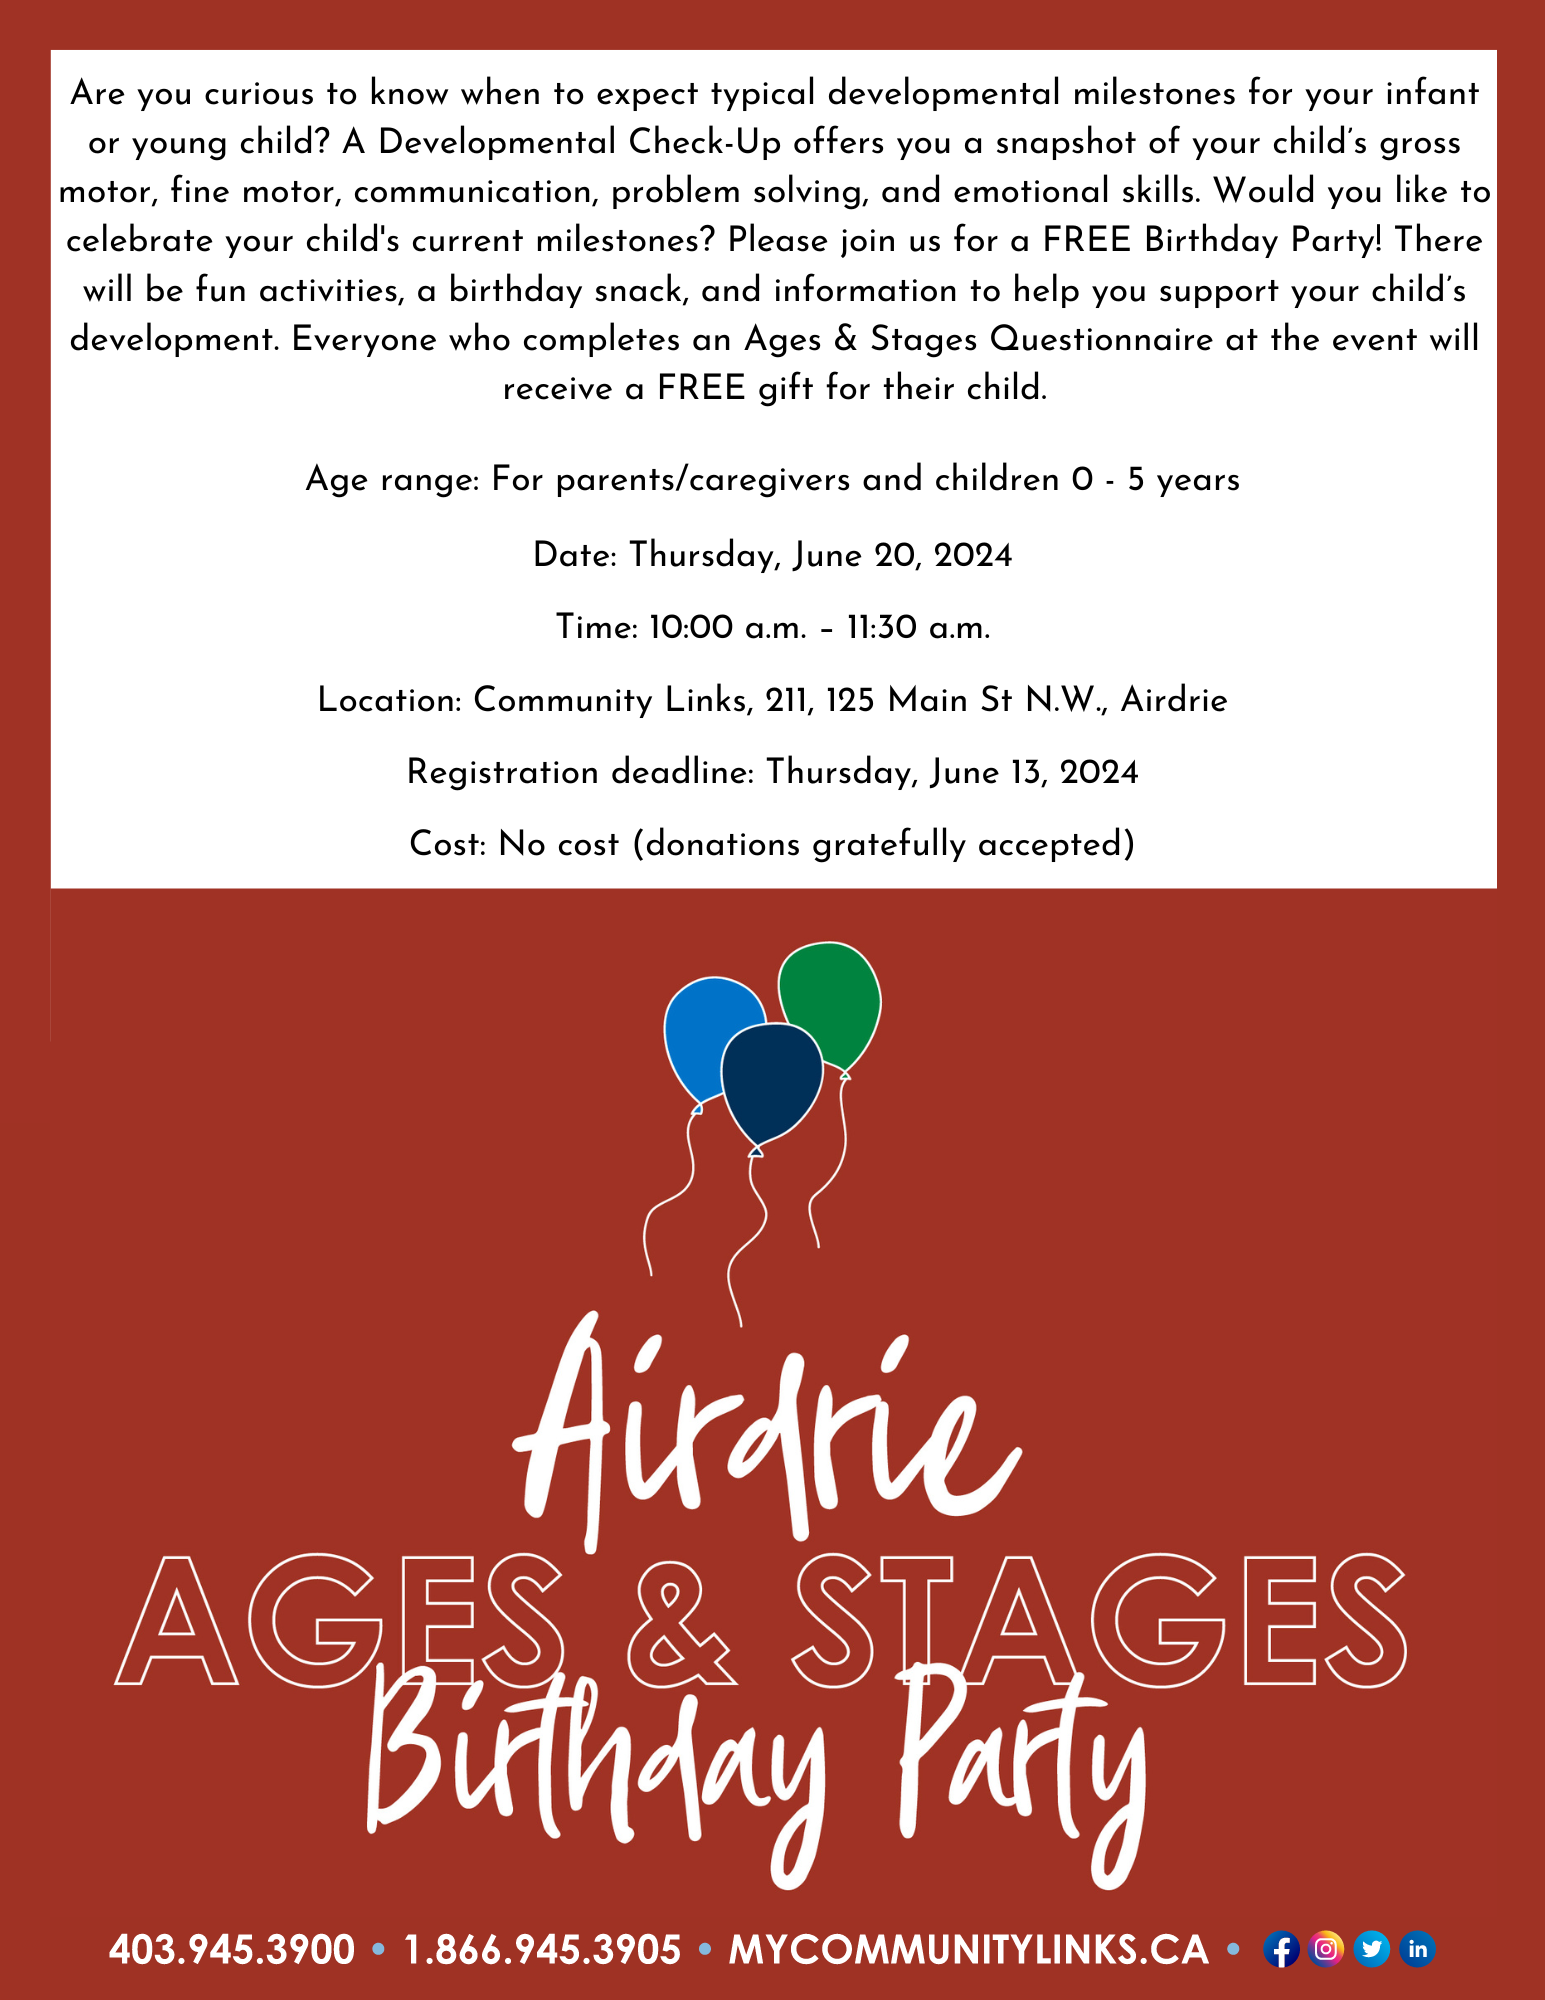 Community Links Airdrie Ages & Stages Birthday Party June 20, 2024